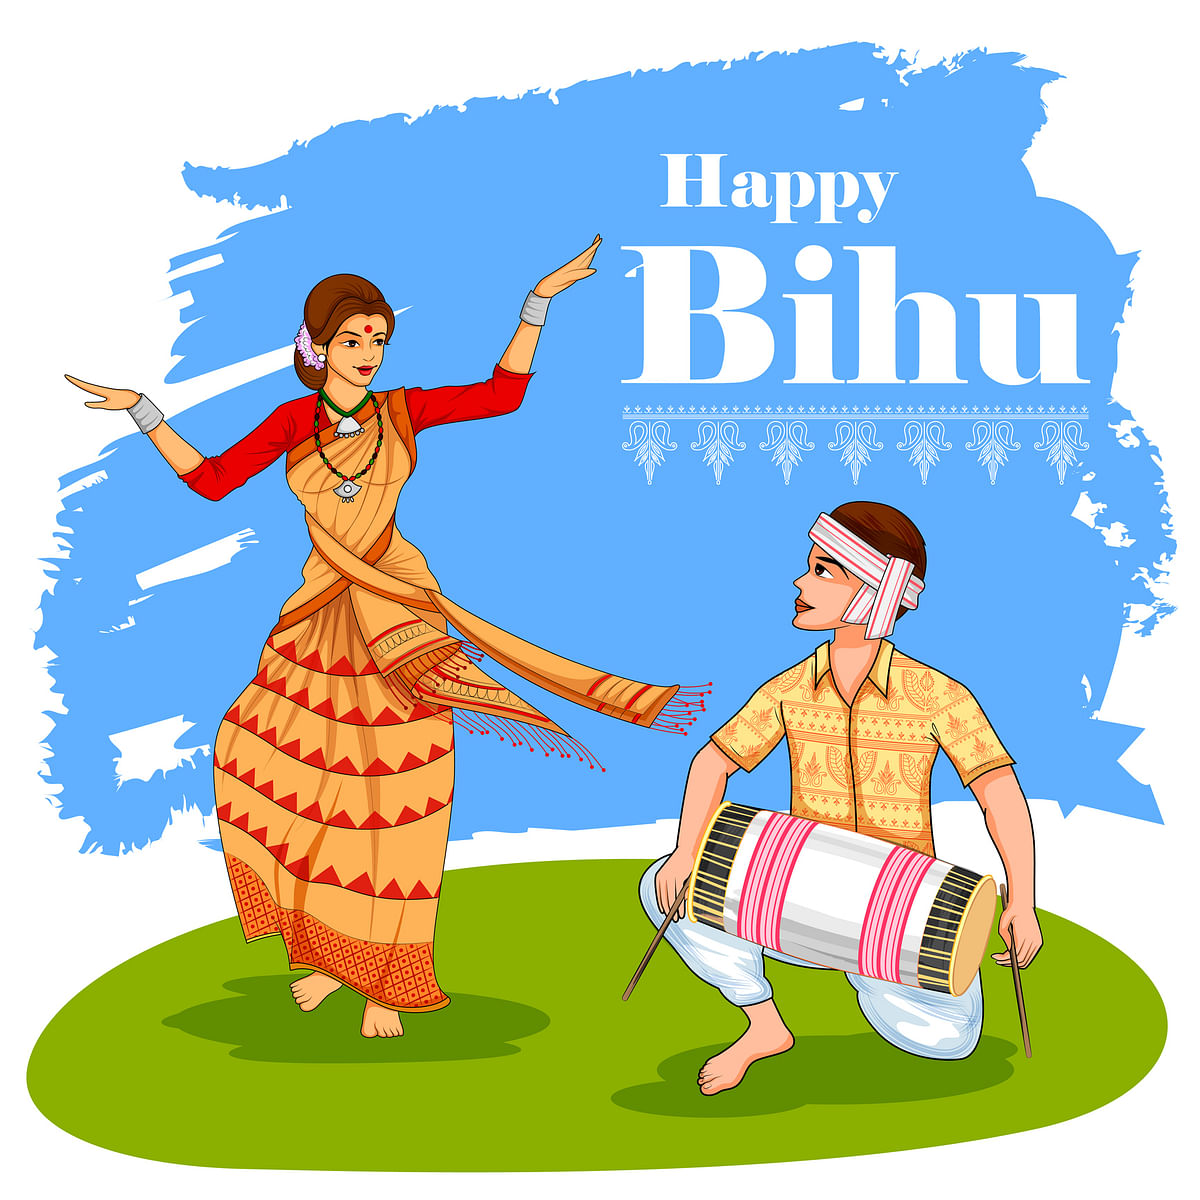 Download best wishes, images and greetings for Magh Bihu 2022 